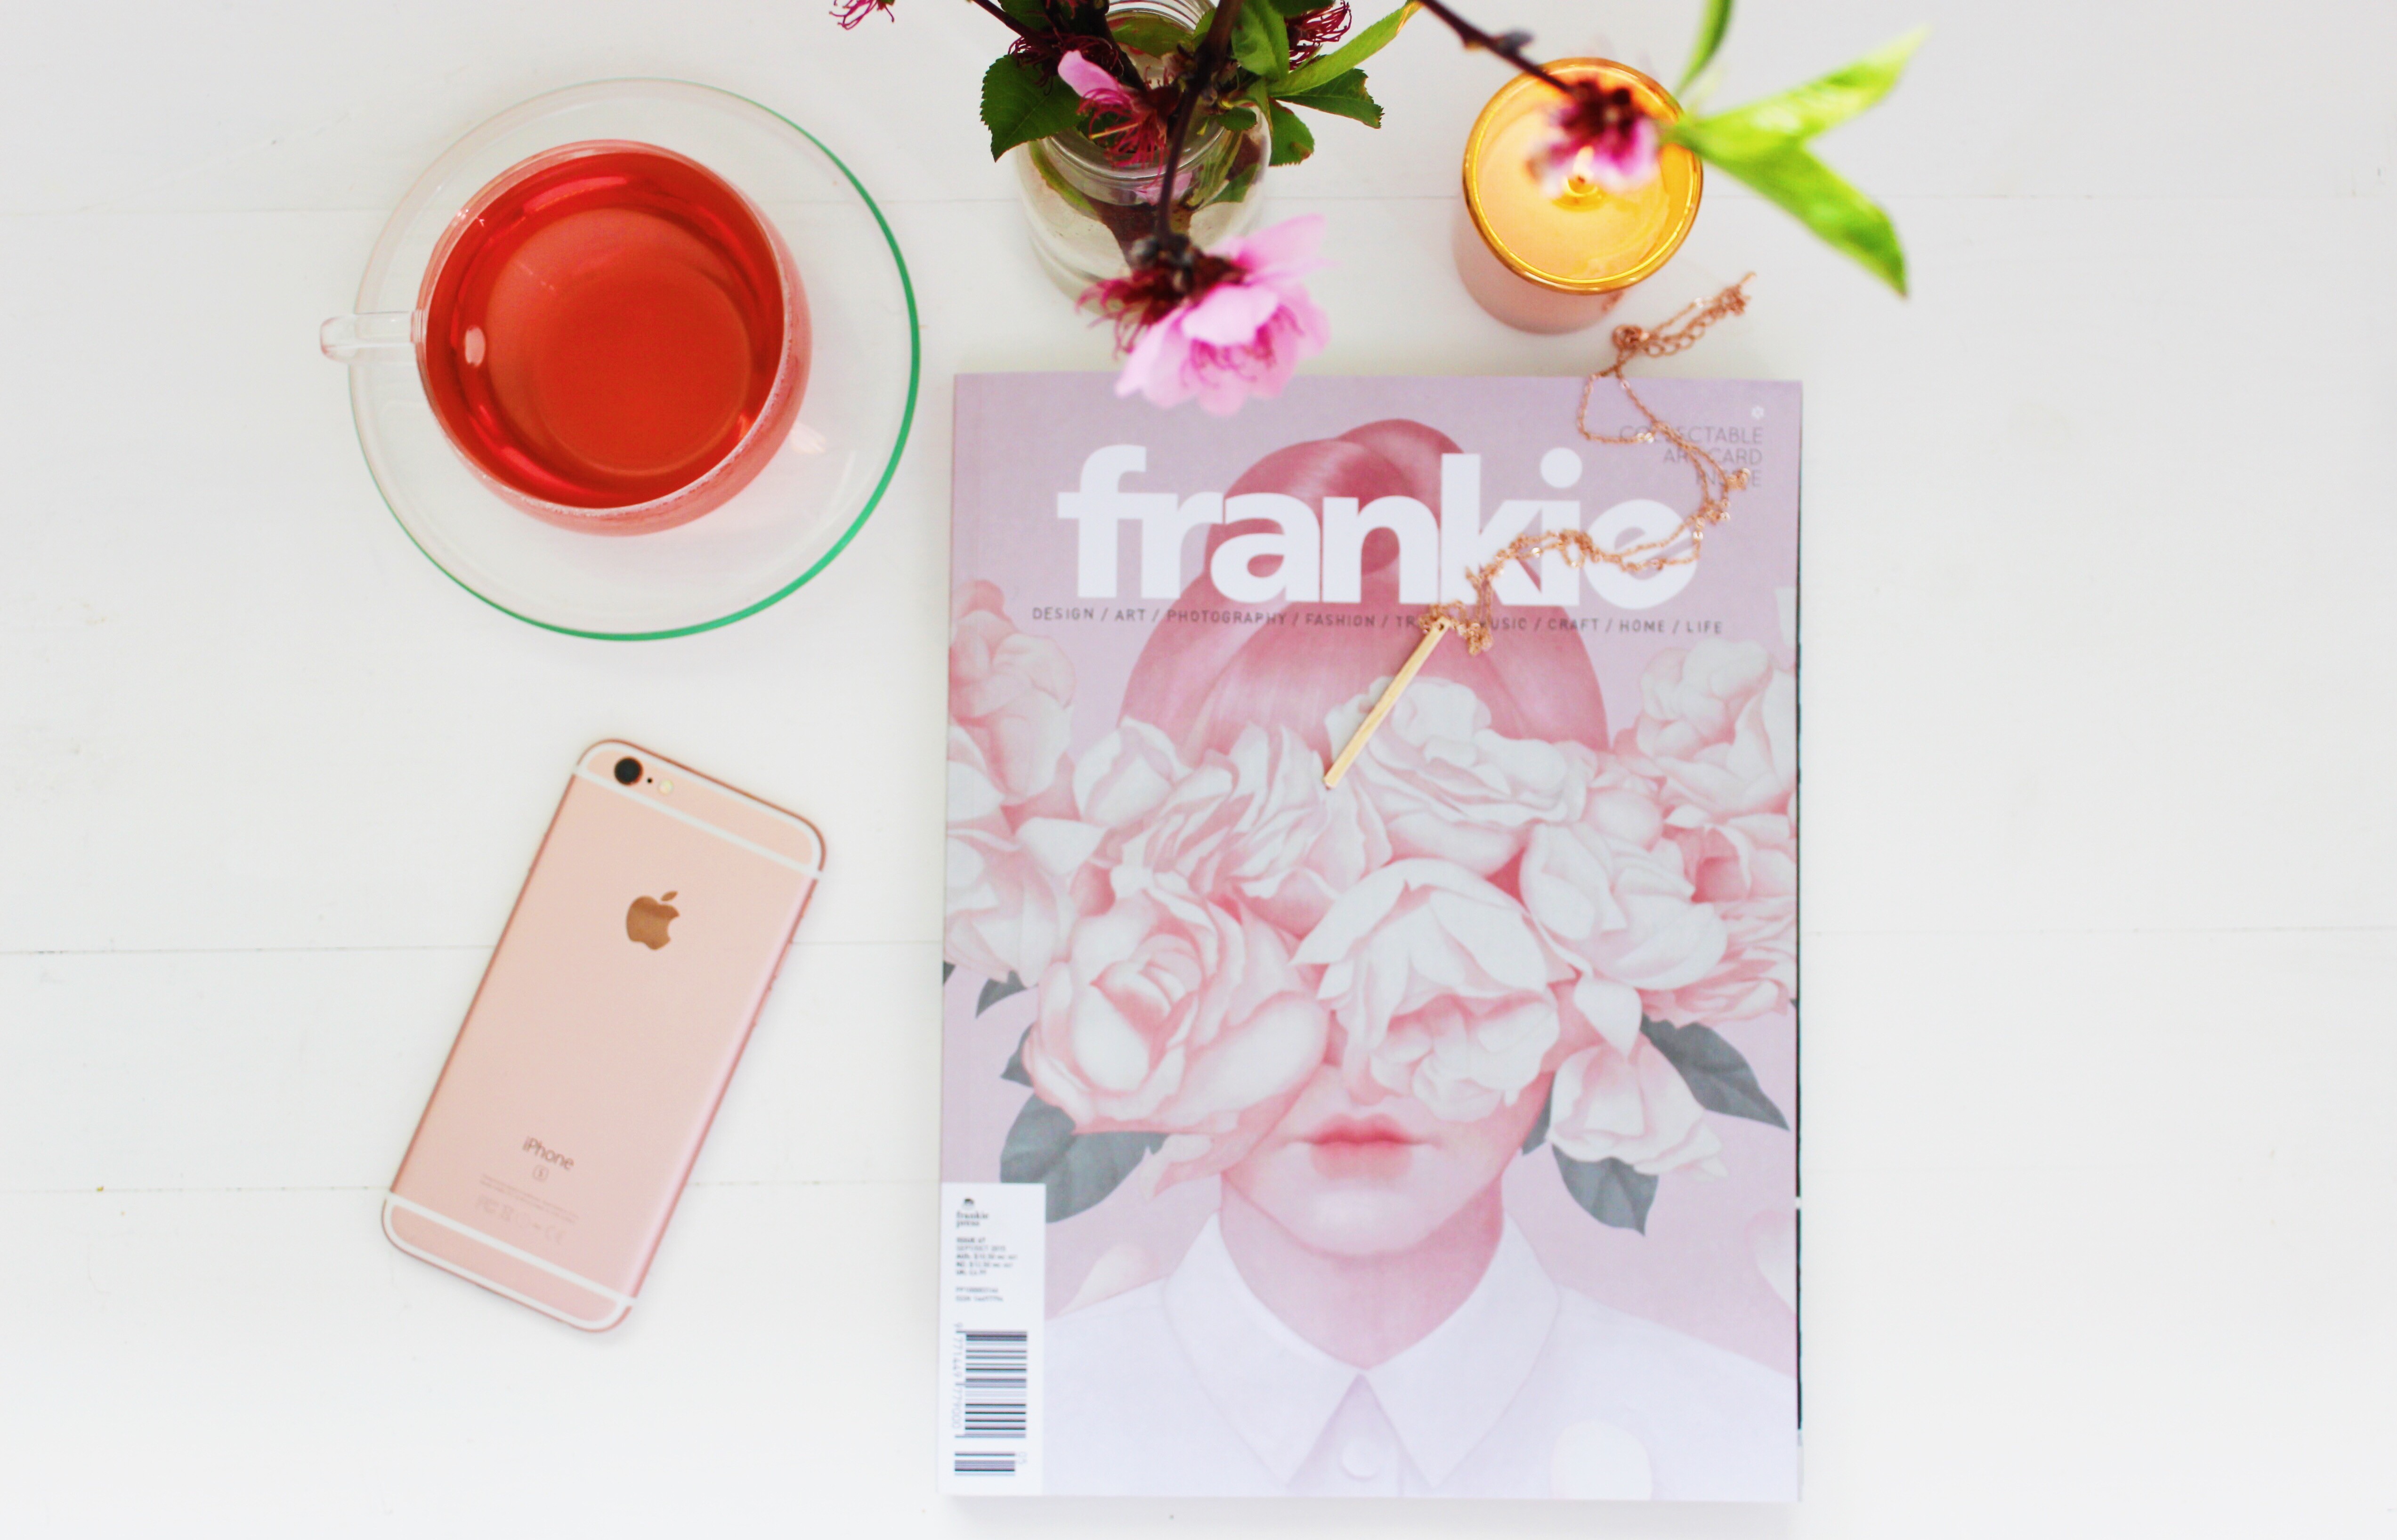 TECH REVIEW: The Apple iPhone 6s and 6s Plus angie fredatovich nz